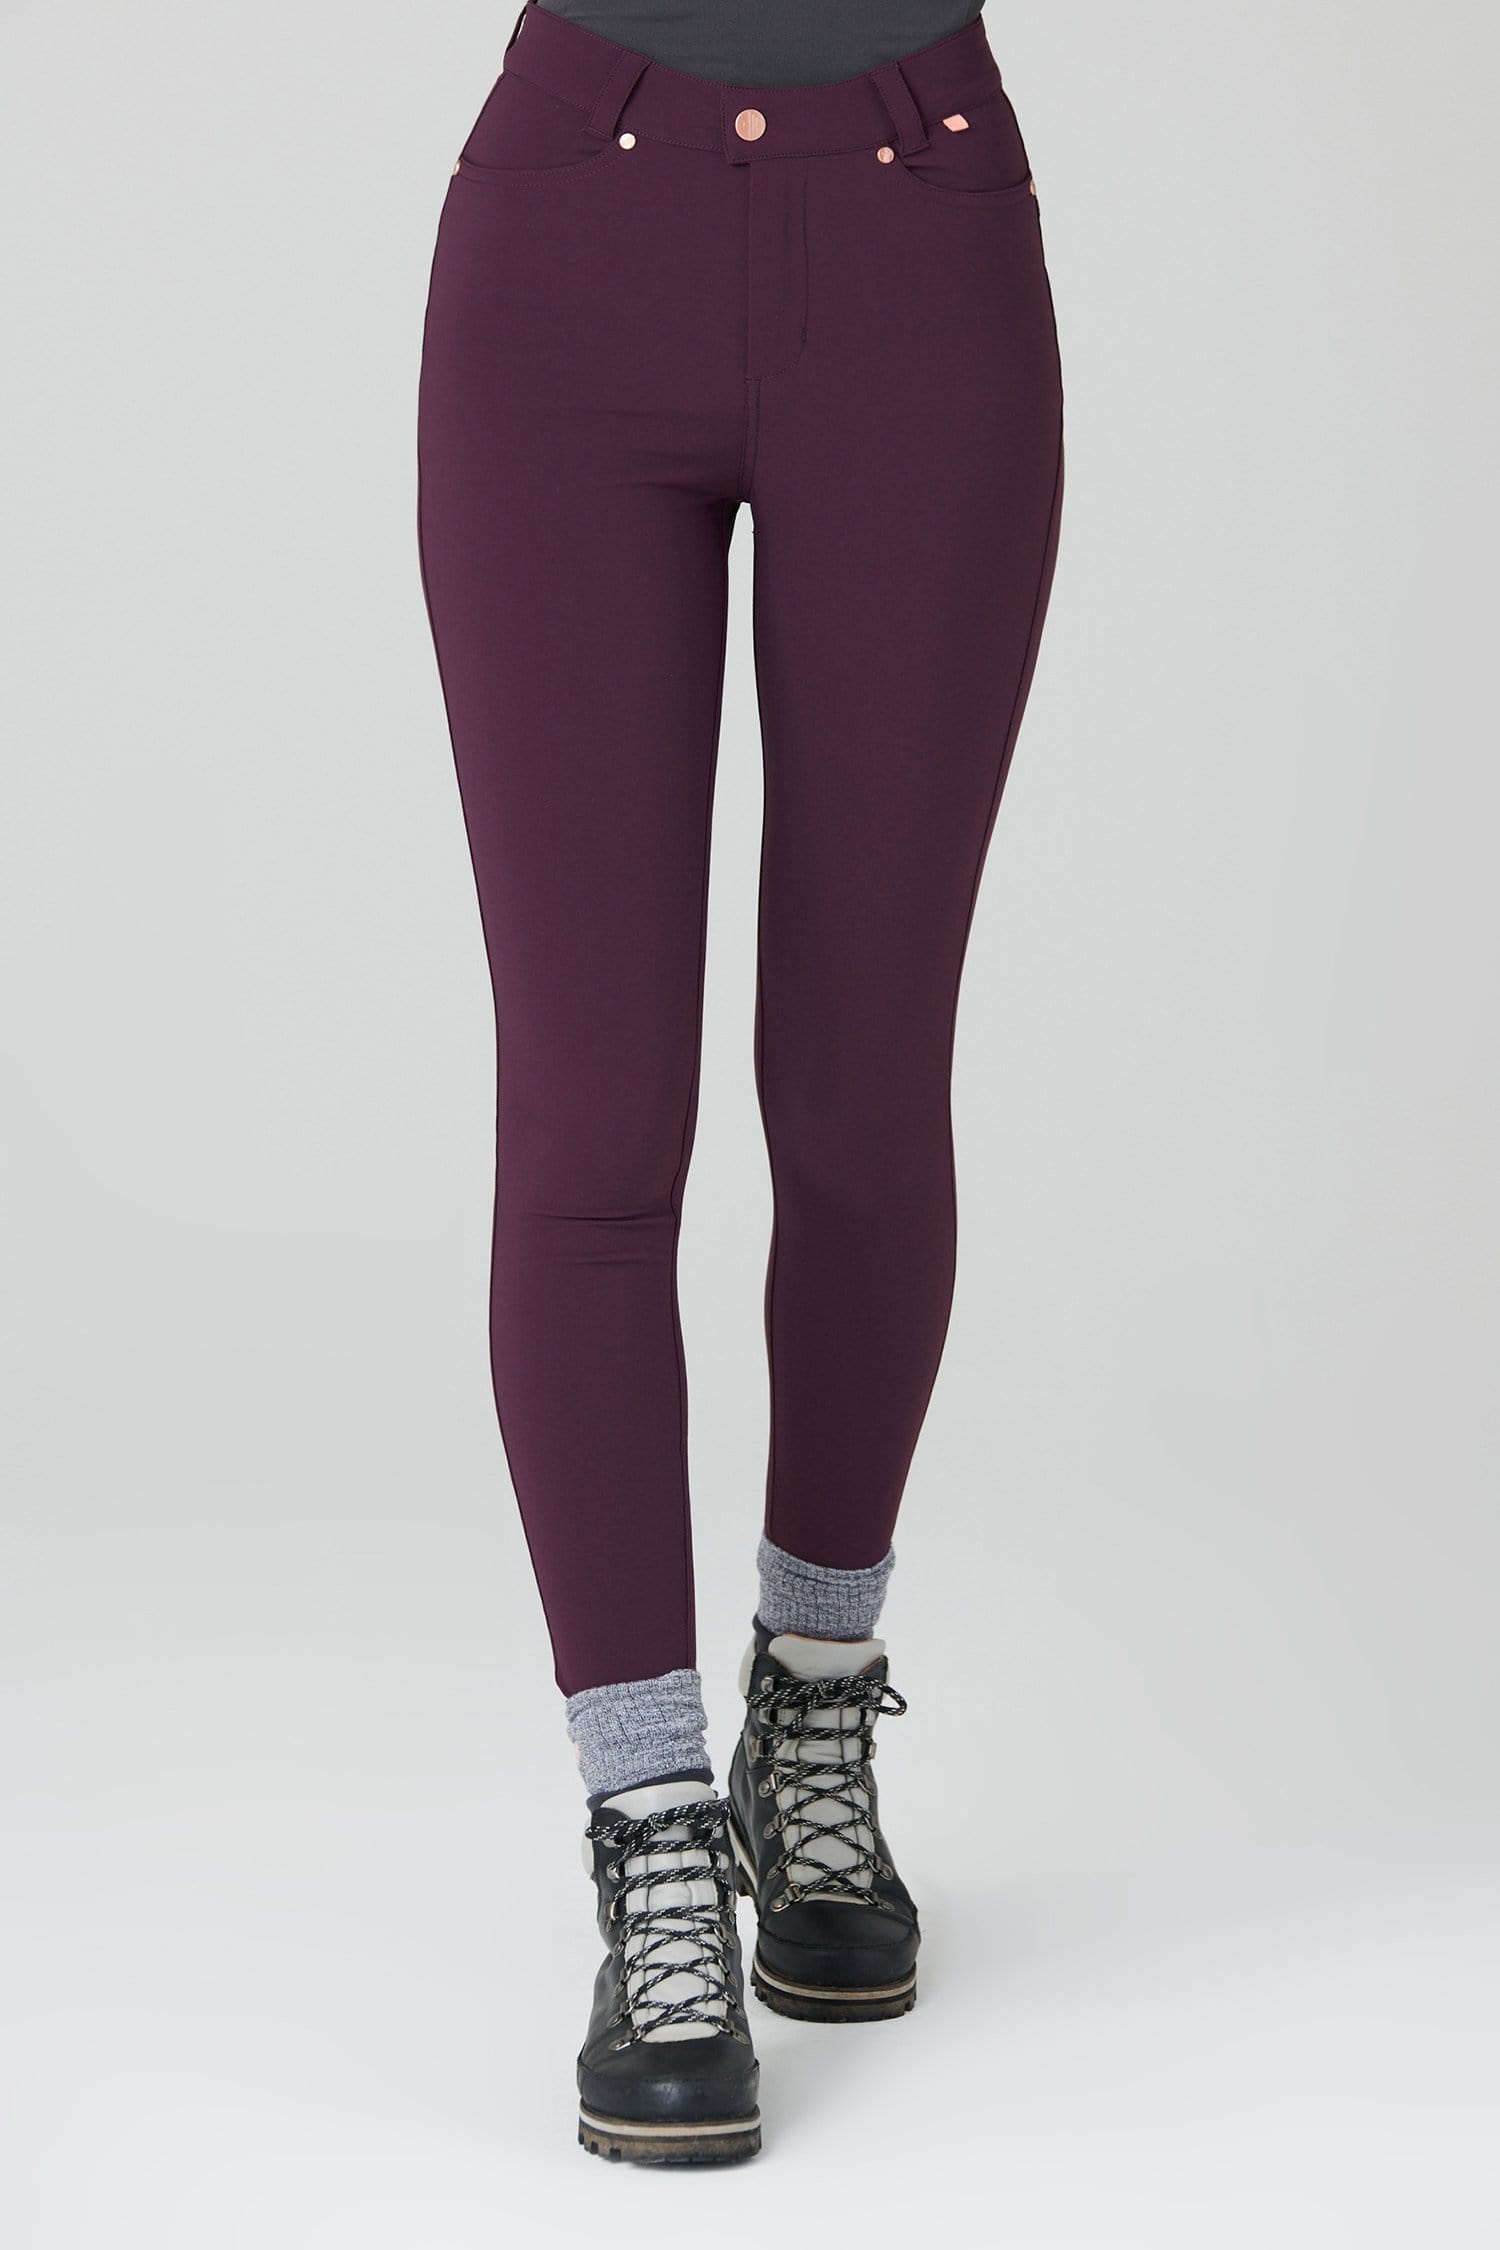 Max Stretch Skinny Outdoor Trousers - Aubergine - 30p / Uk12 - Womens - Acai Outdoorwear